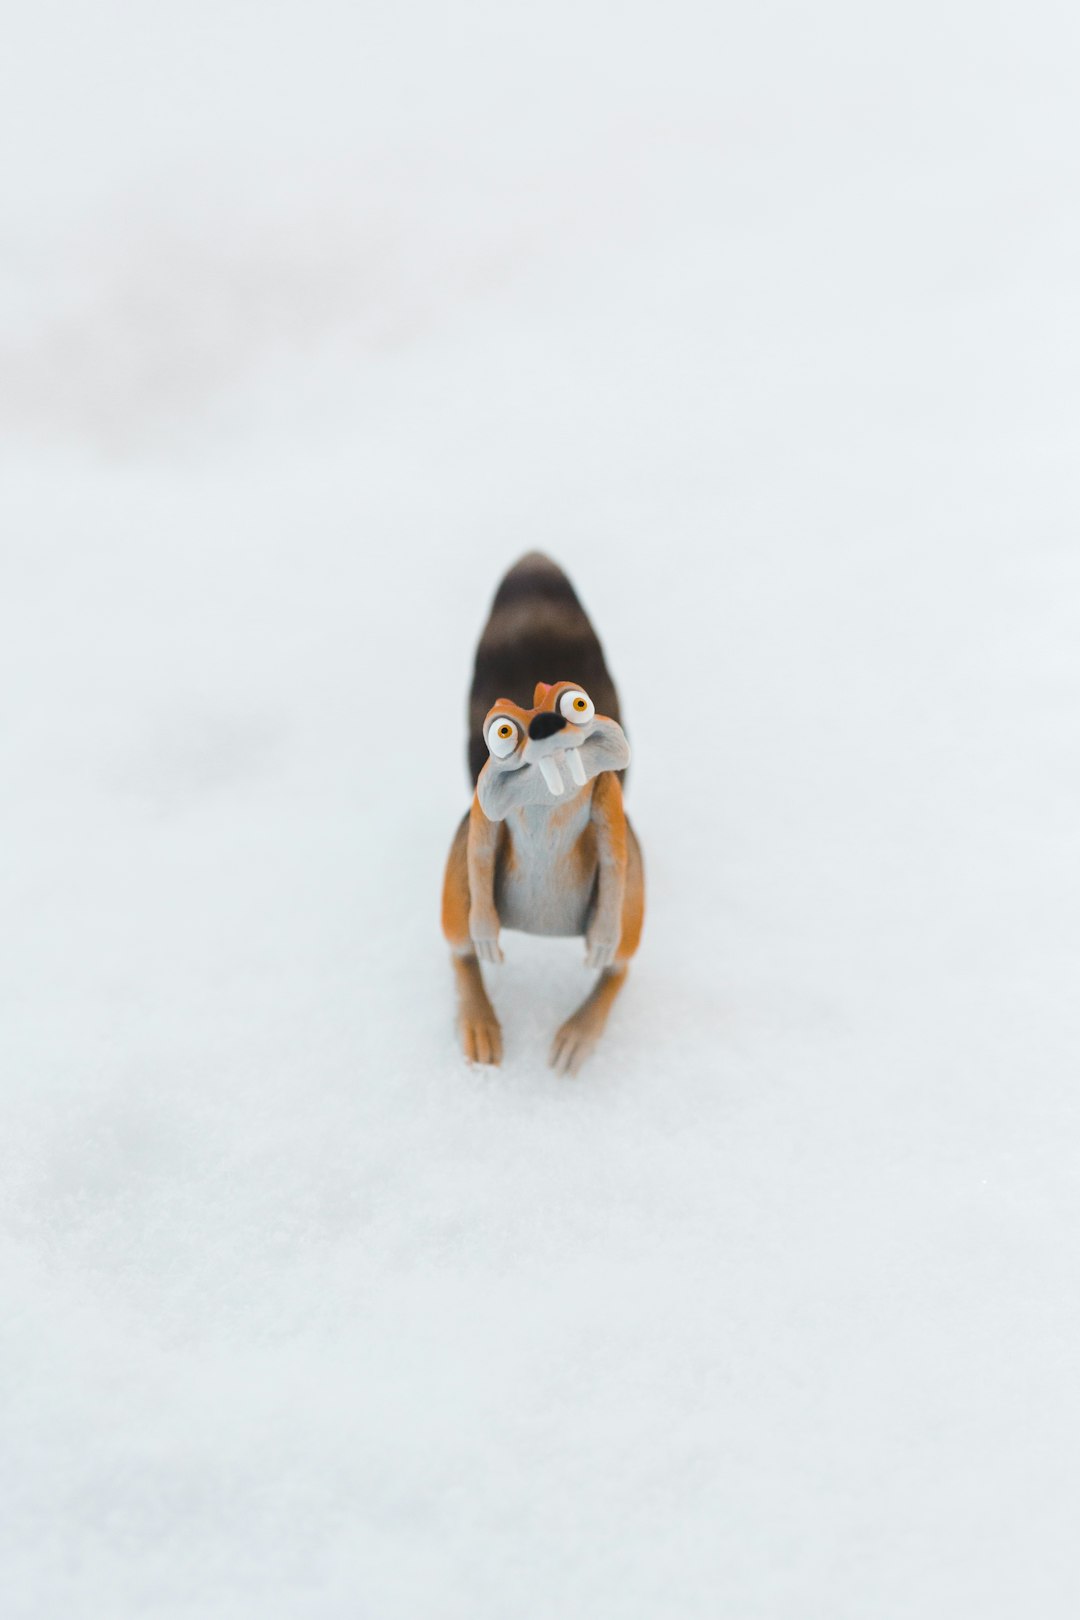 brown and white dog figurine on snow covered ground